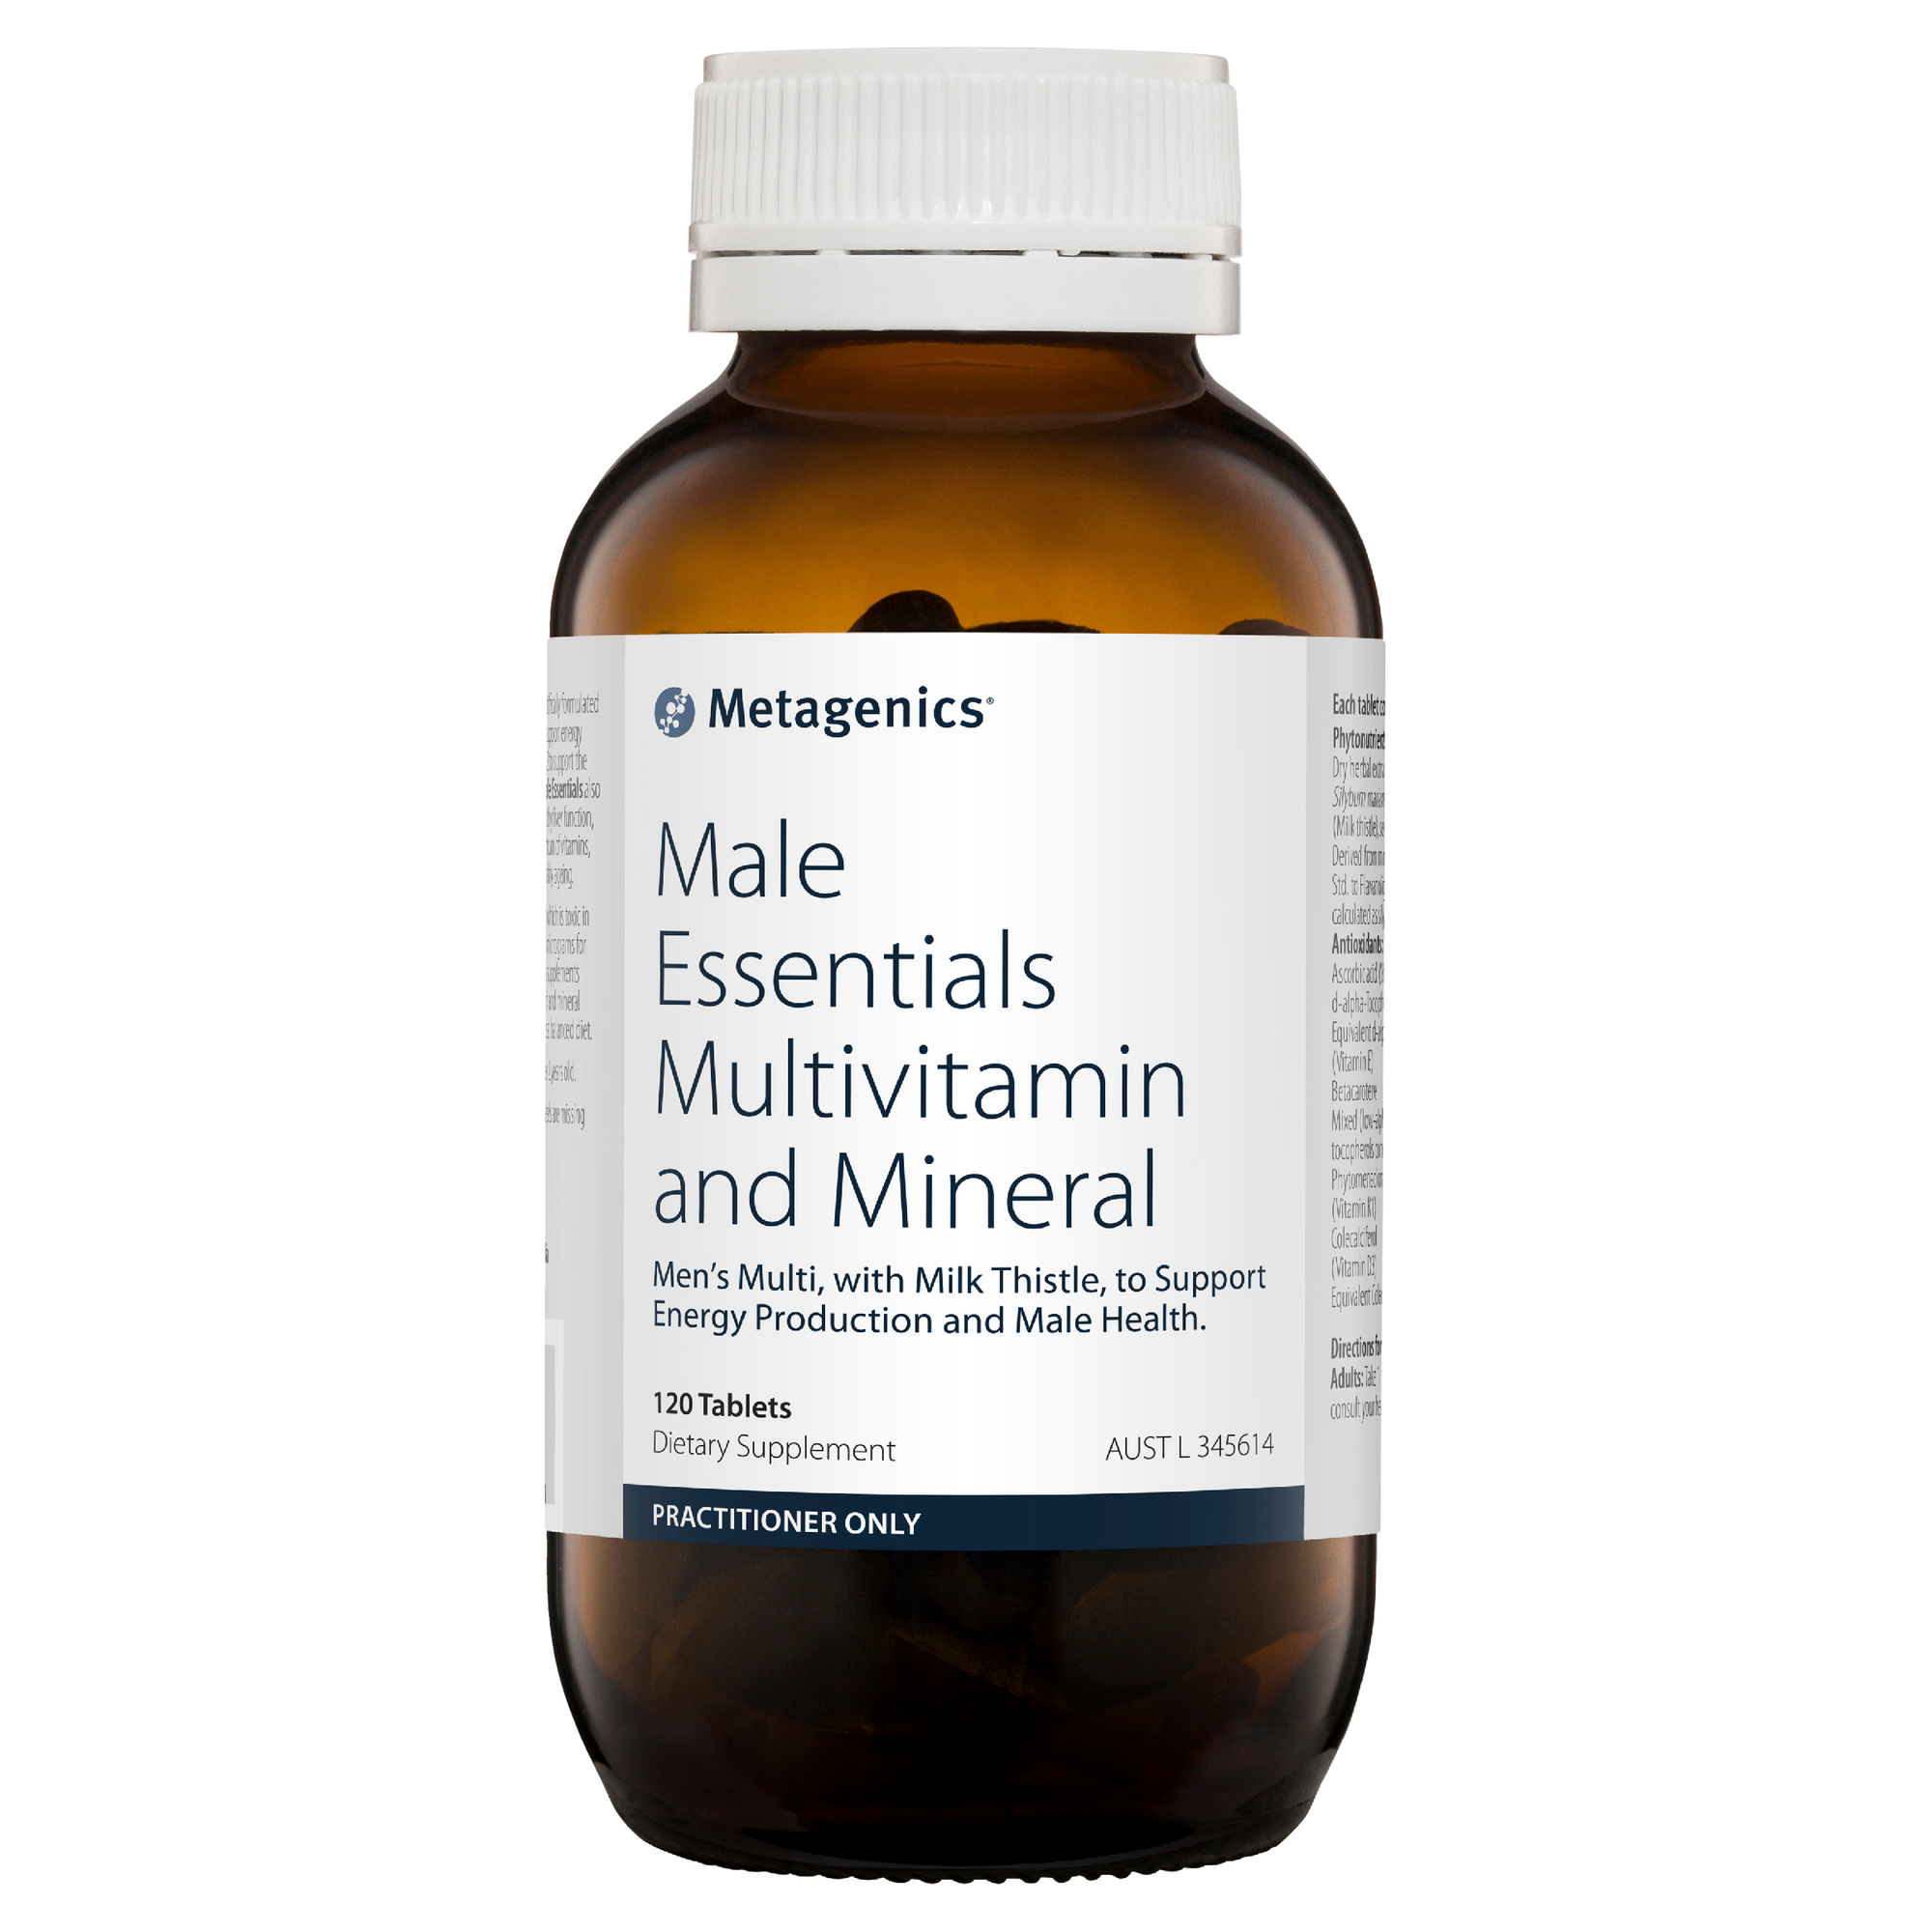 Metagenics Male Essentials Multivitamin and Mineral Tablet